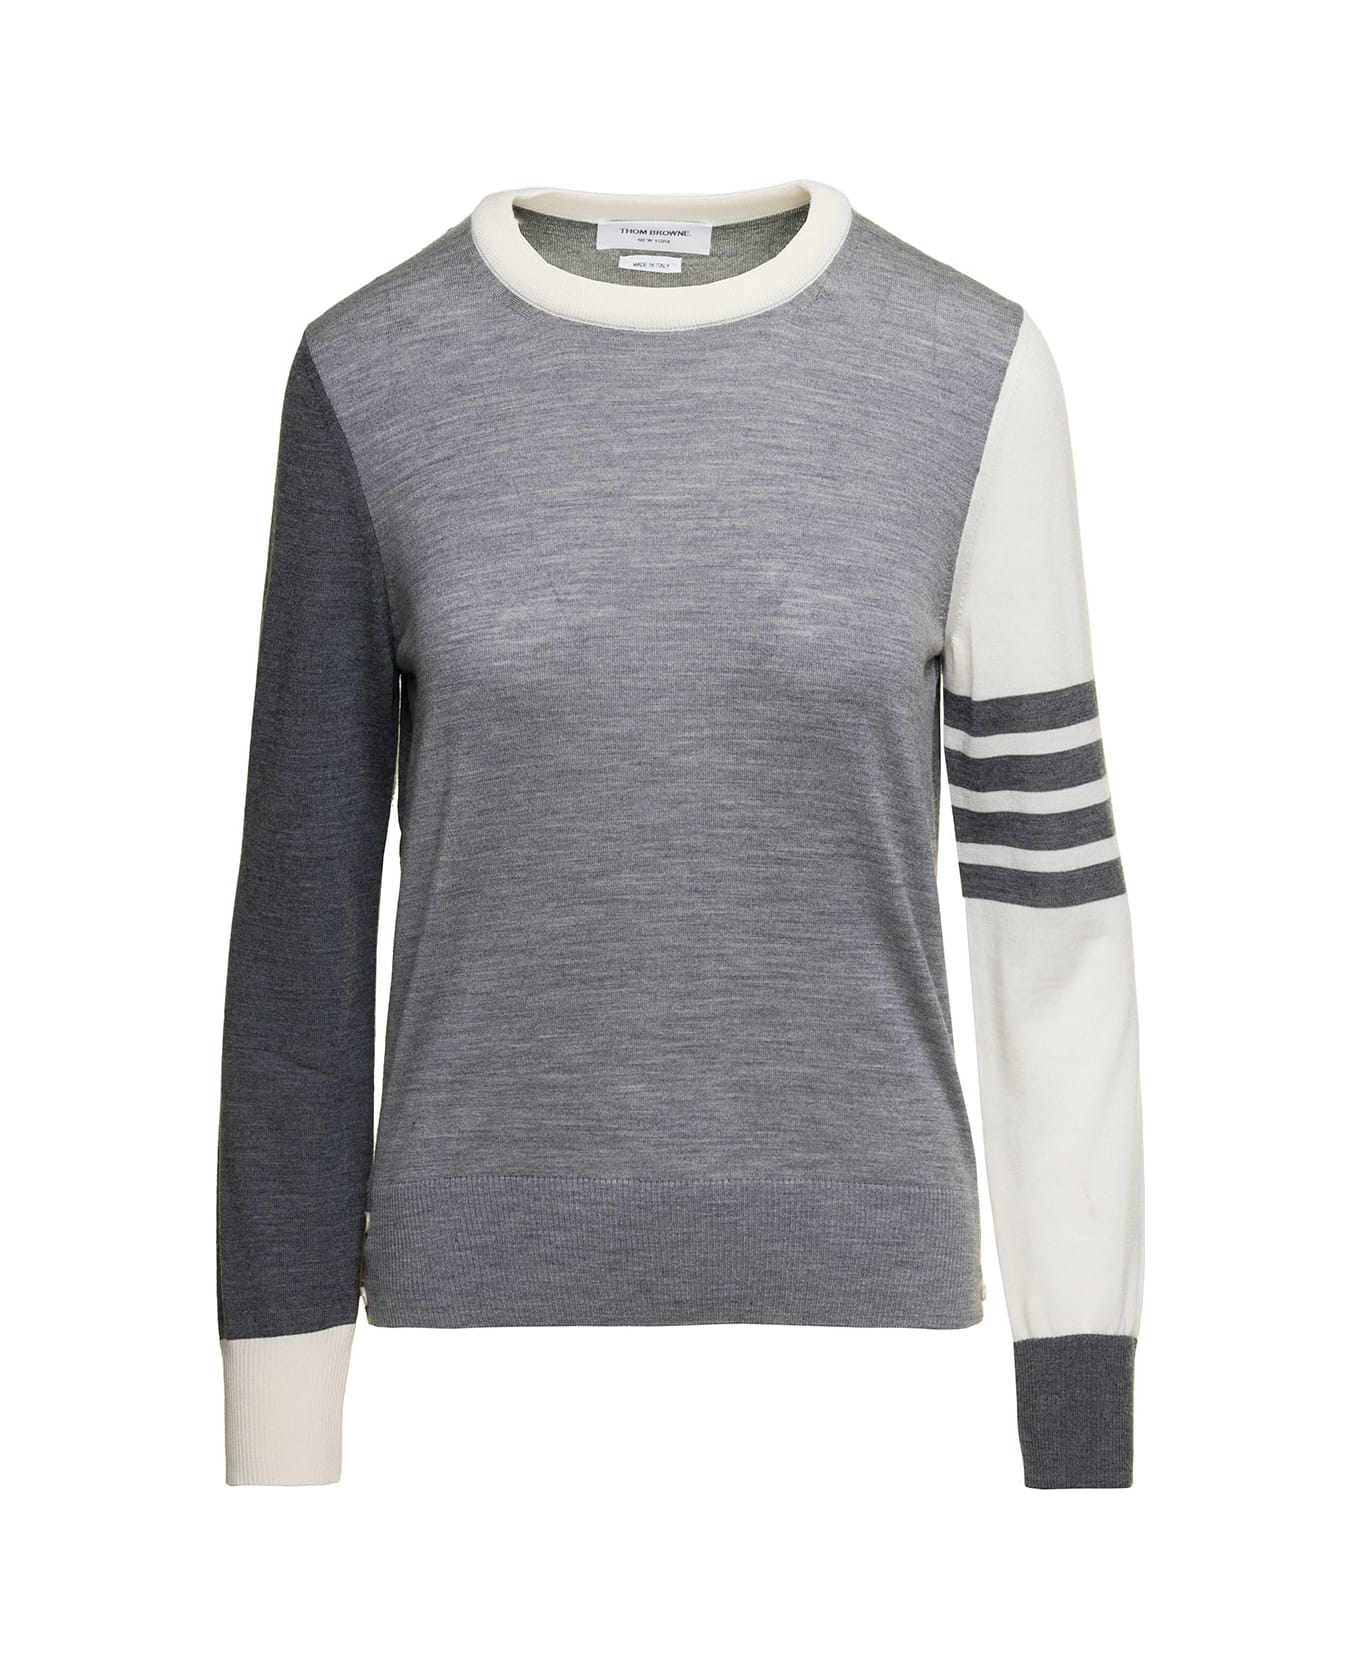 Thom Browne Fun Mix Relaxed Fit Crew Neck Pullover In Fine Merino